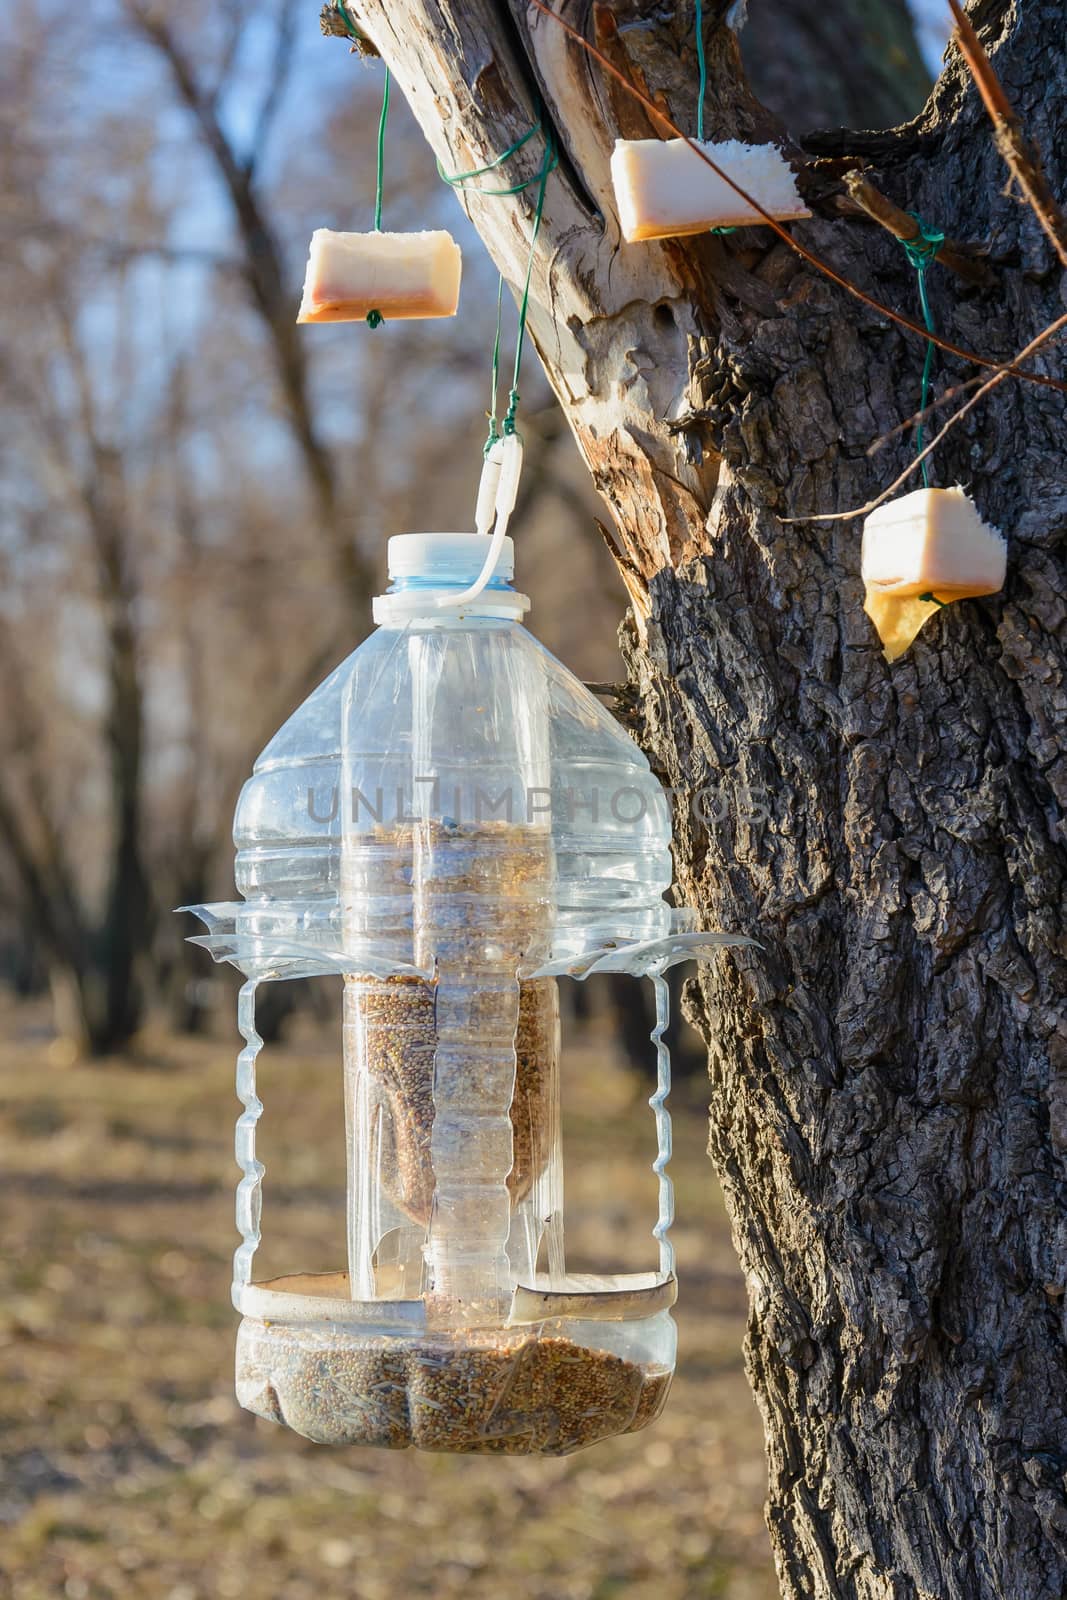 Big plastic bottle used as feeder for birds in winter